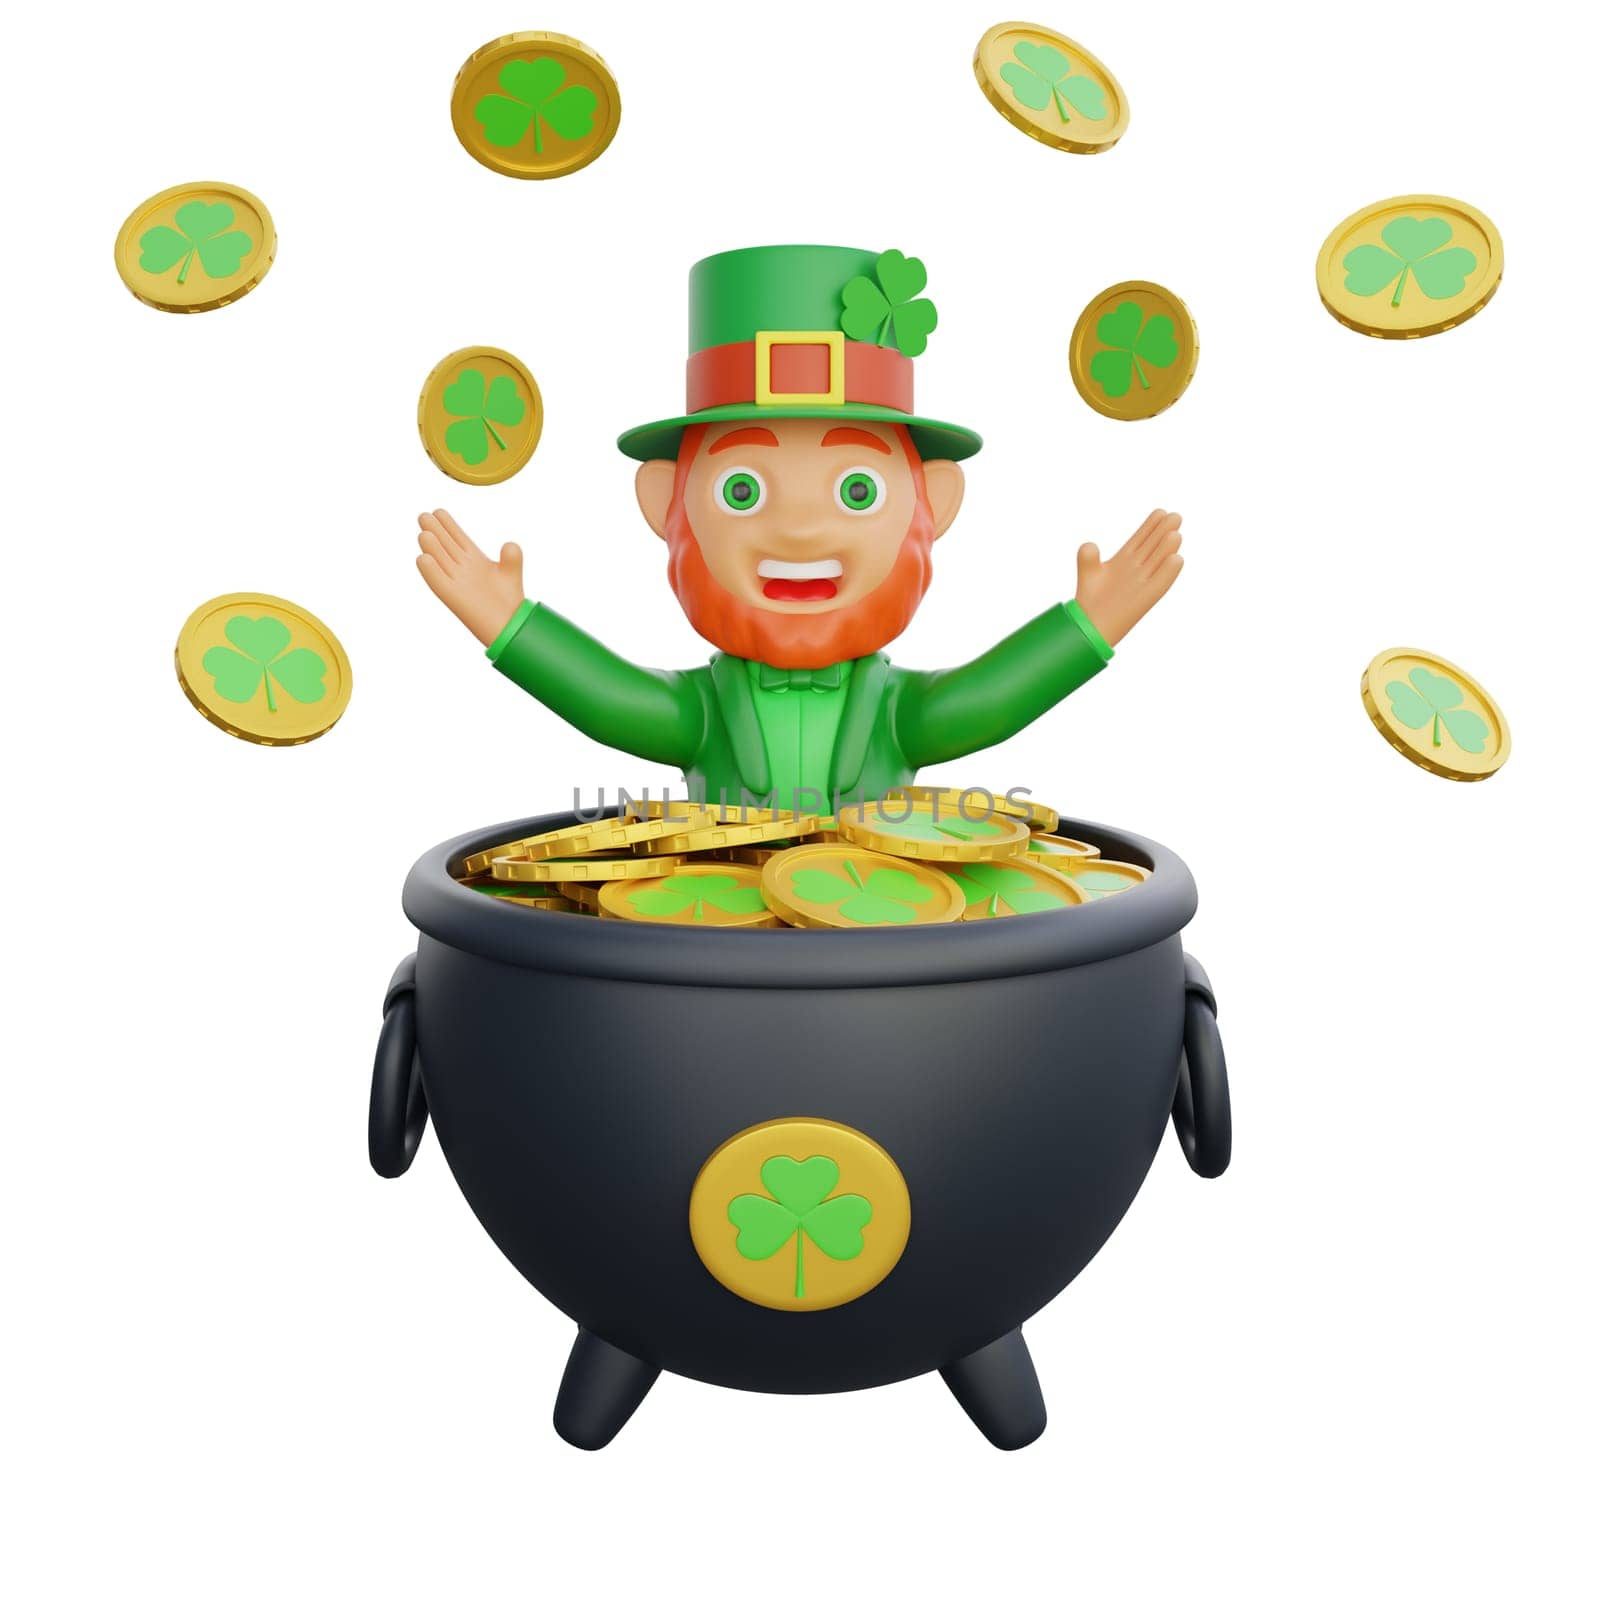 3D illustration of St. Patrick's Day character leprechaun inside a cauldron surrounded by golden coins by Rahmat_Djayusman